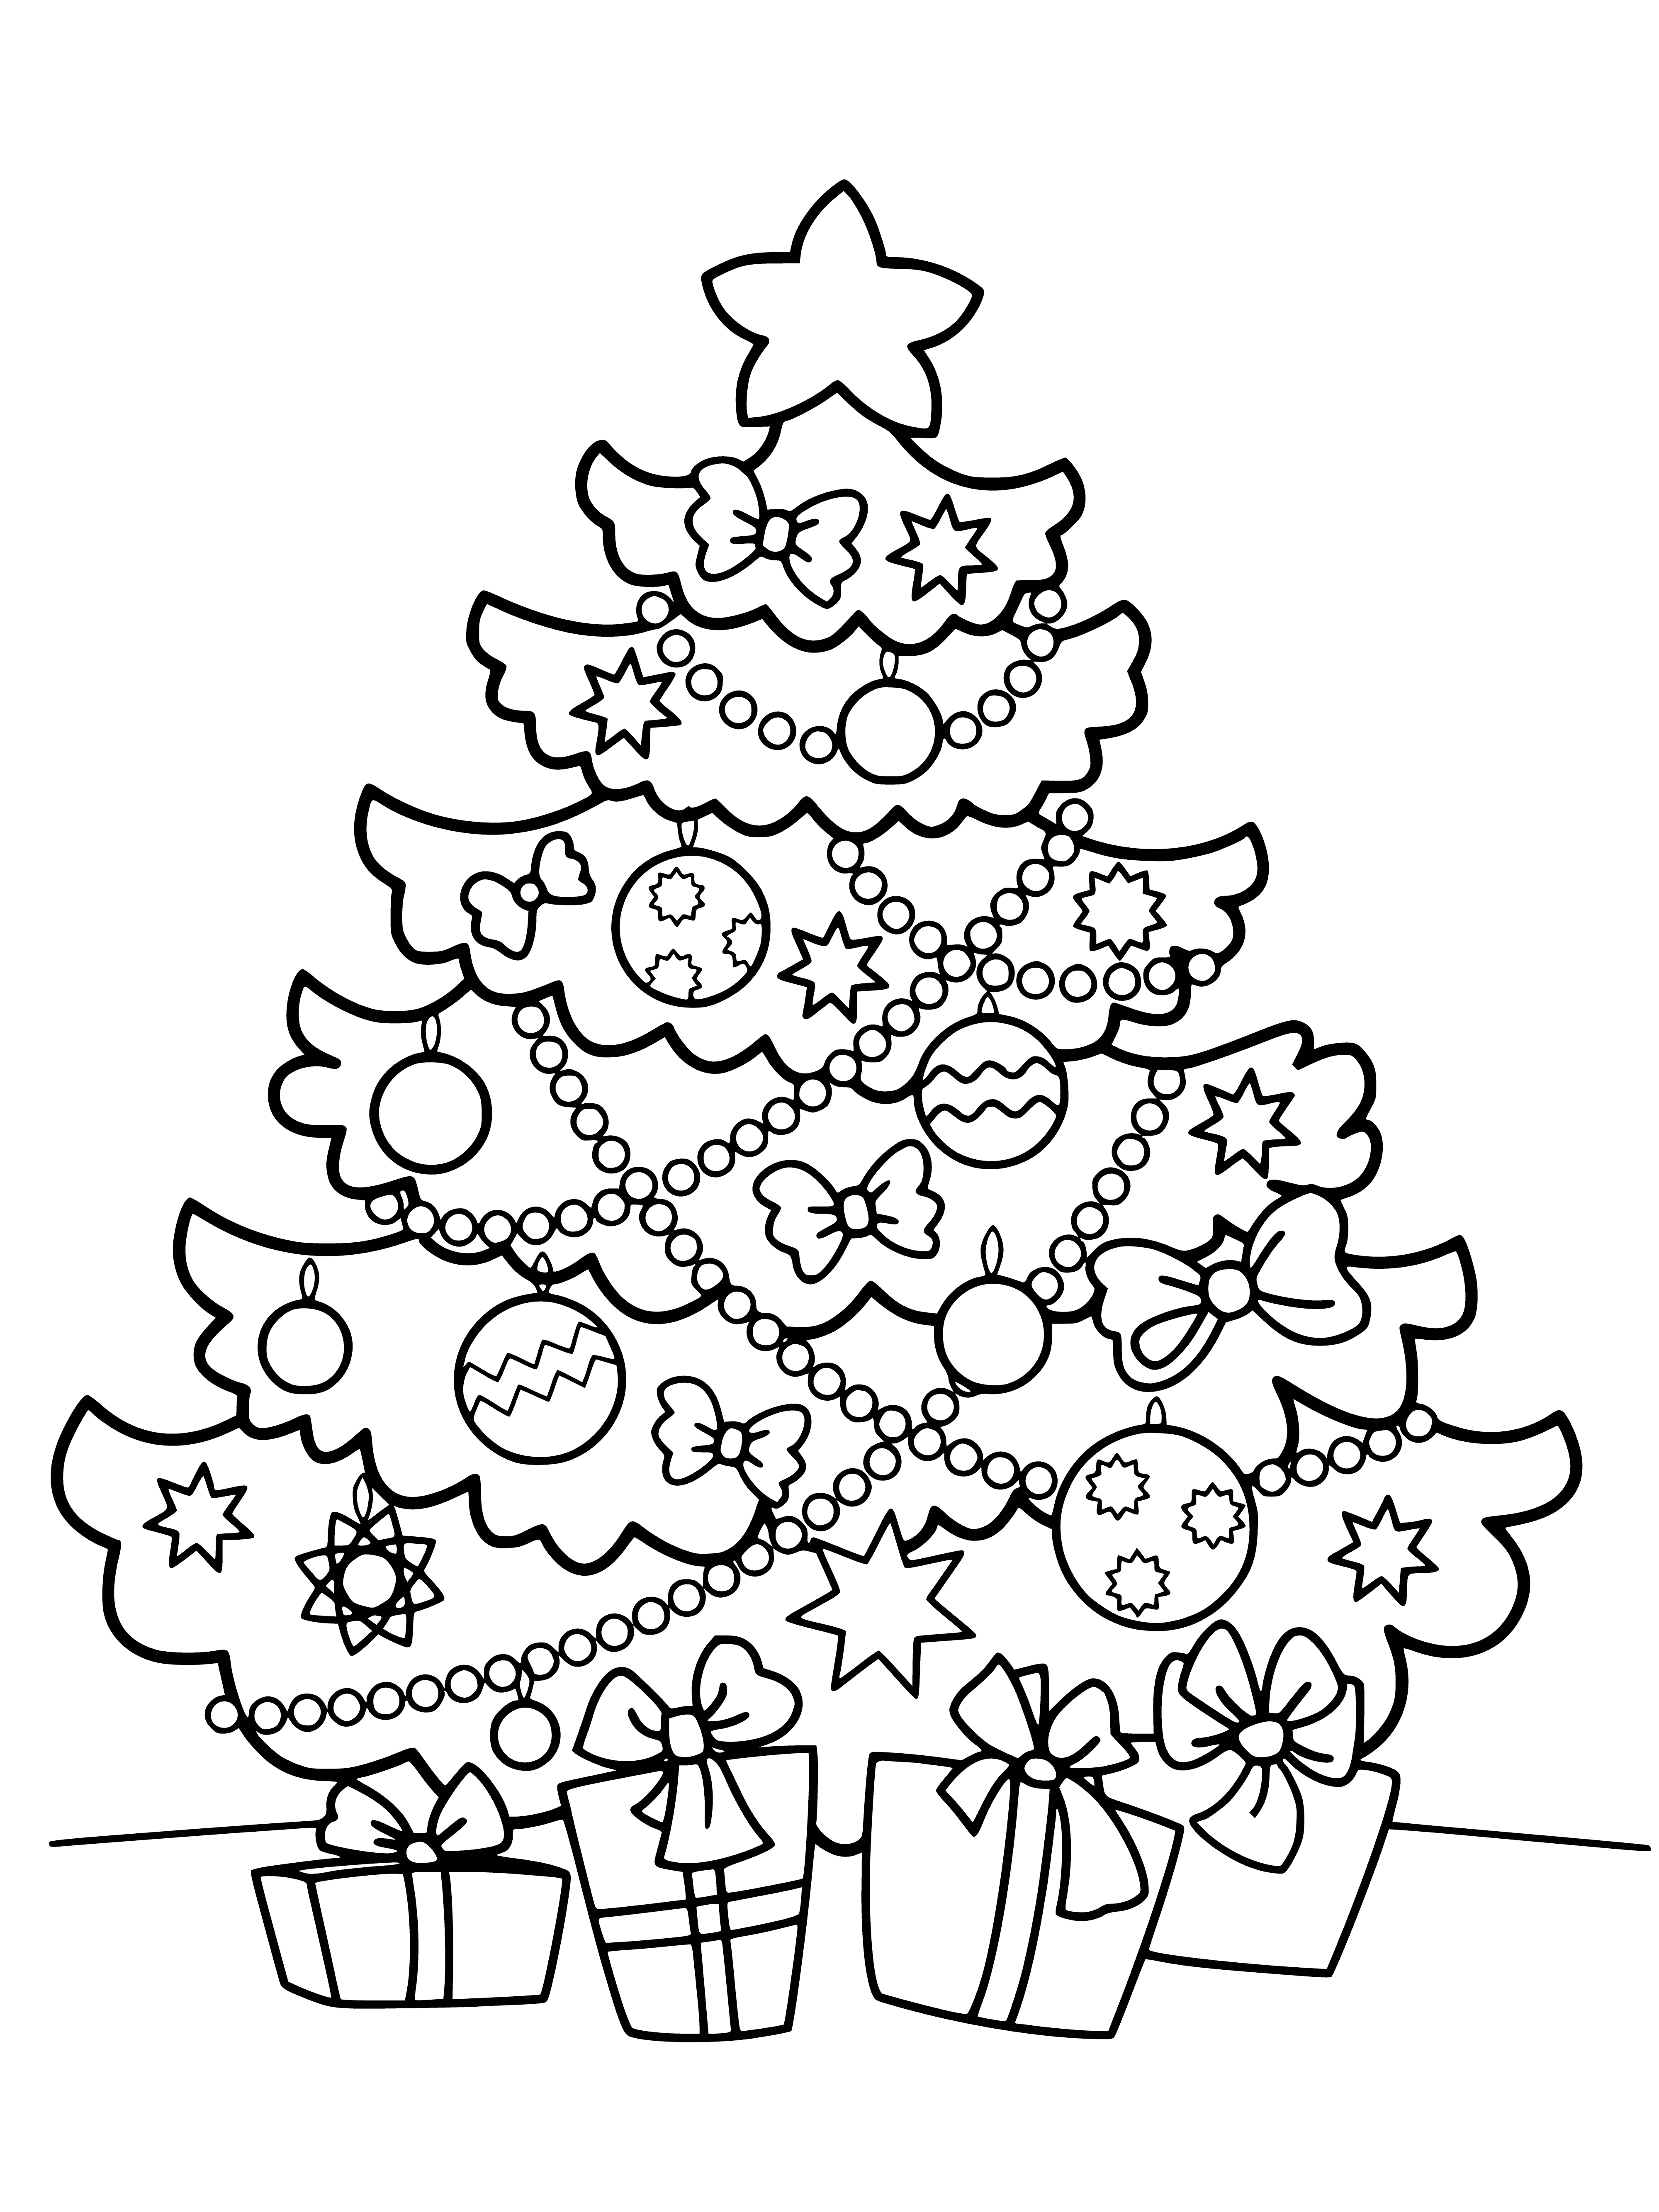 Beautiful Christmas trees of different colors and sizes with presents under them to color! #ChristmasTree #ColoringPages